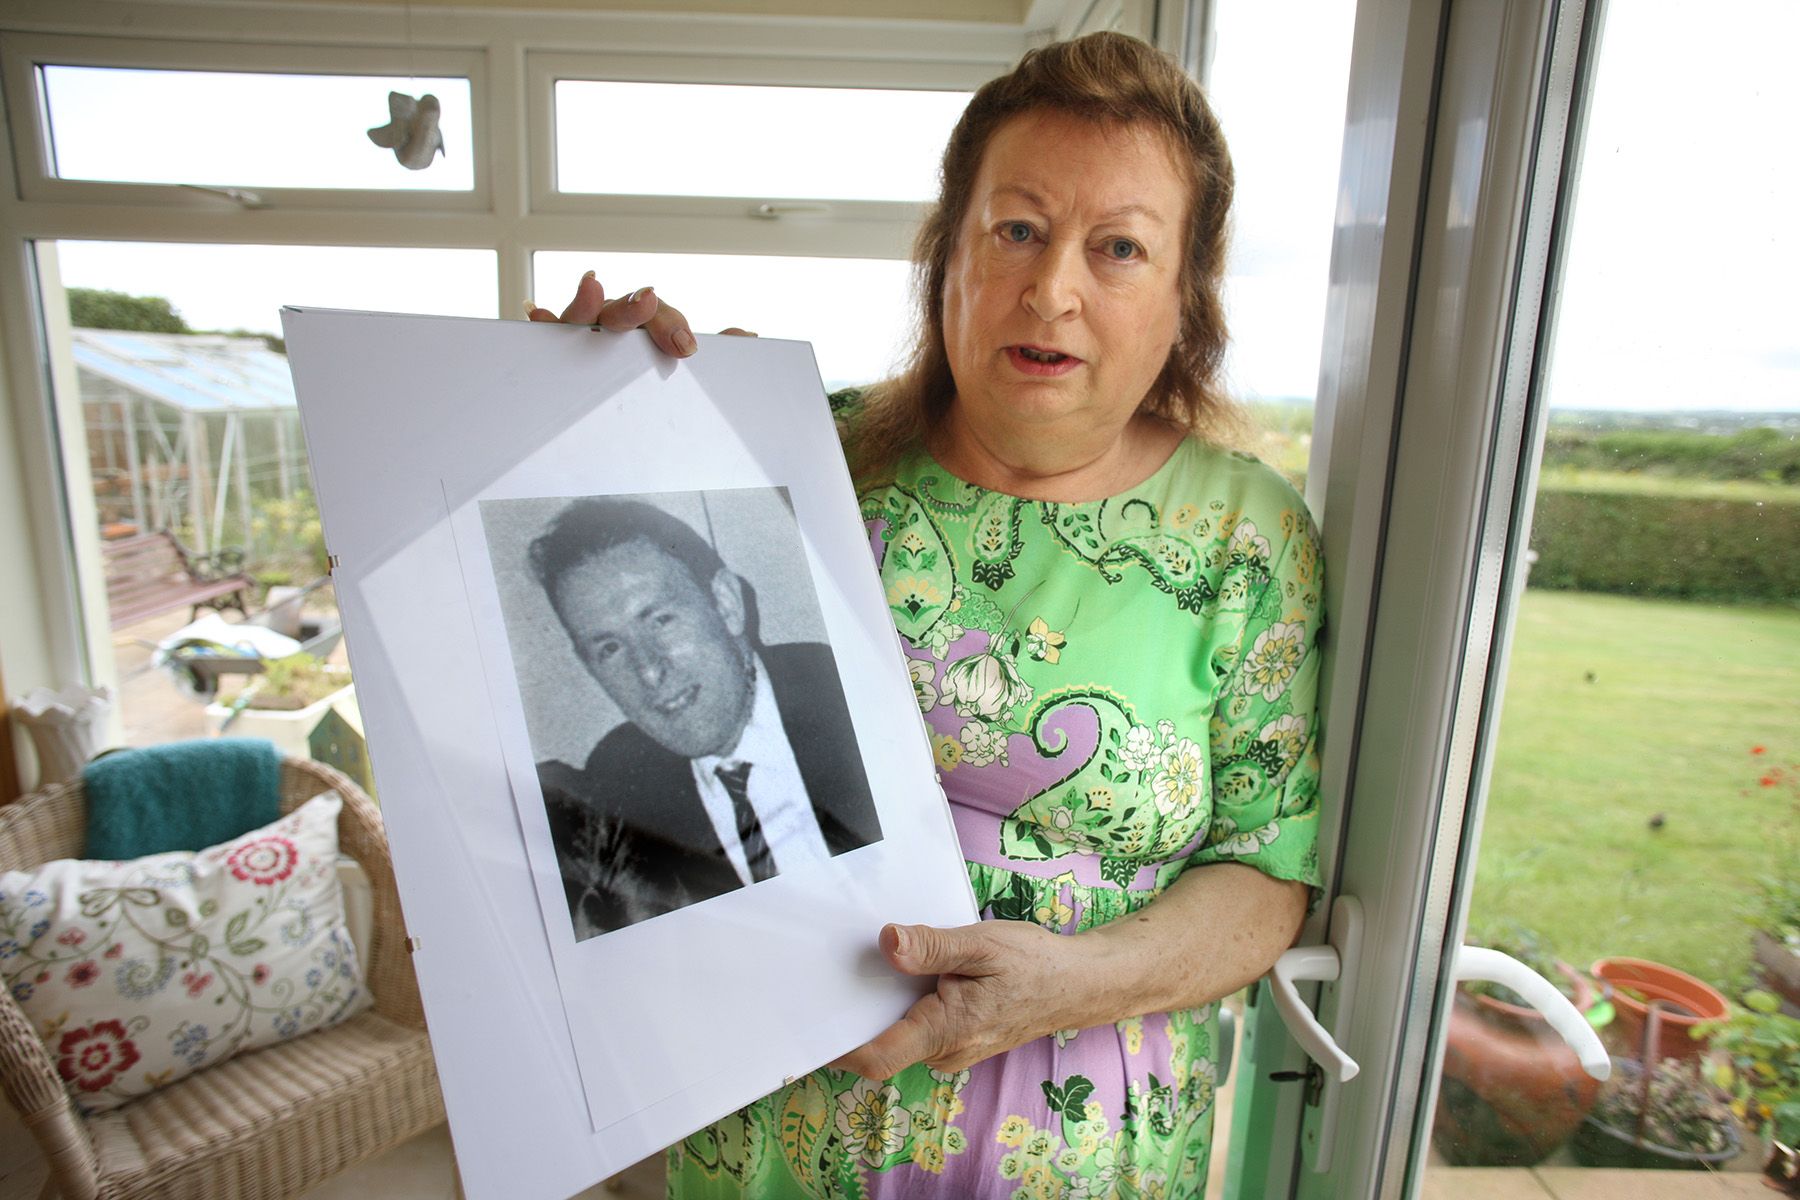 FIGHTING FOR JUSTICE: Patricia McVeigh holds a photograph of her father Patrick